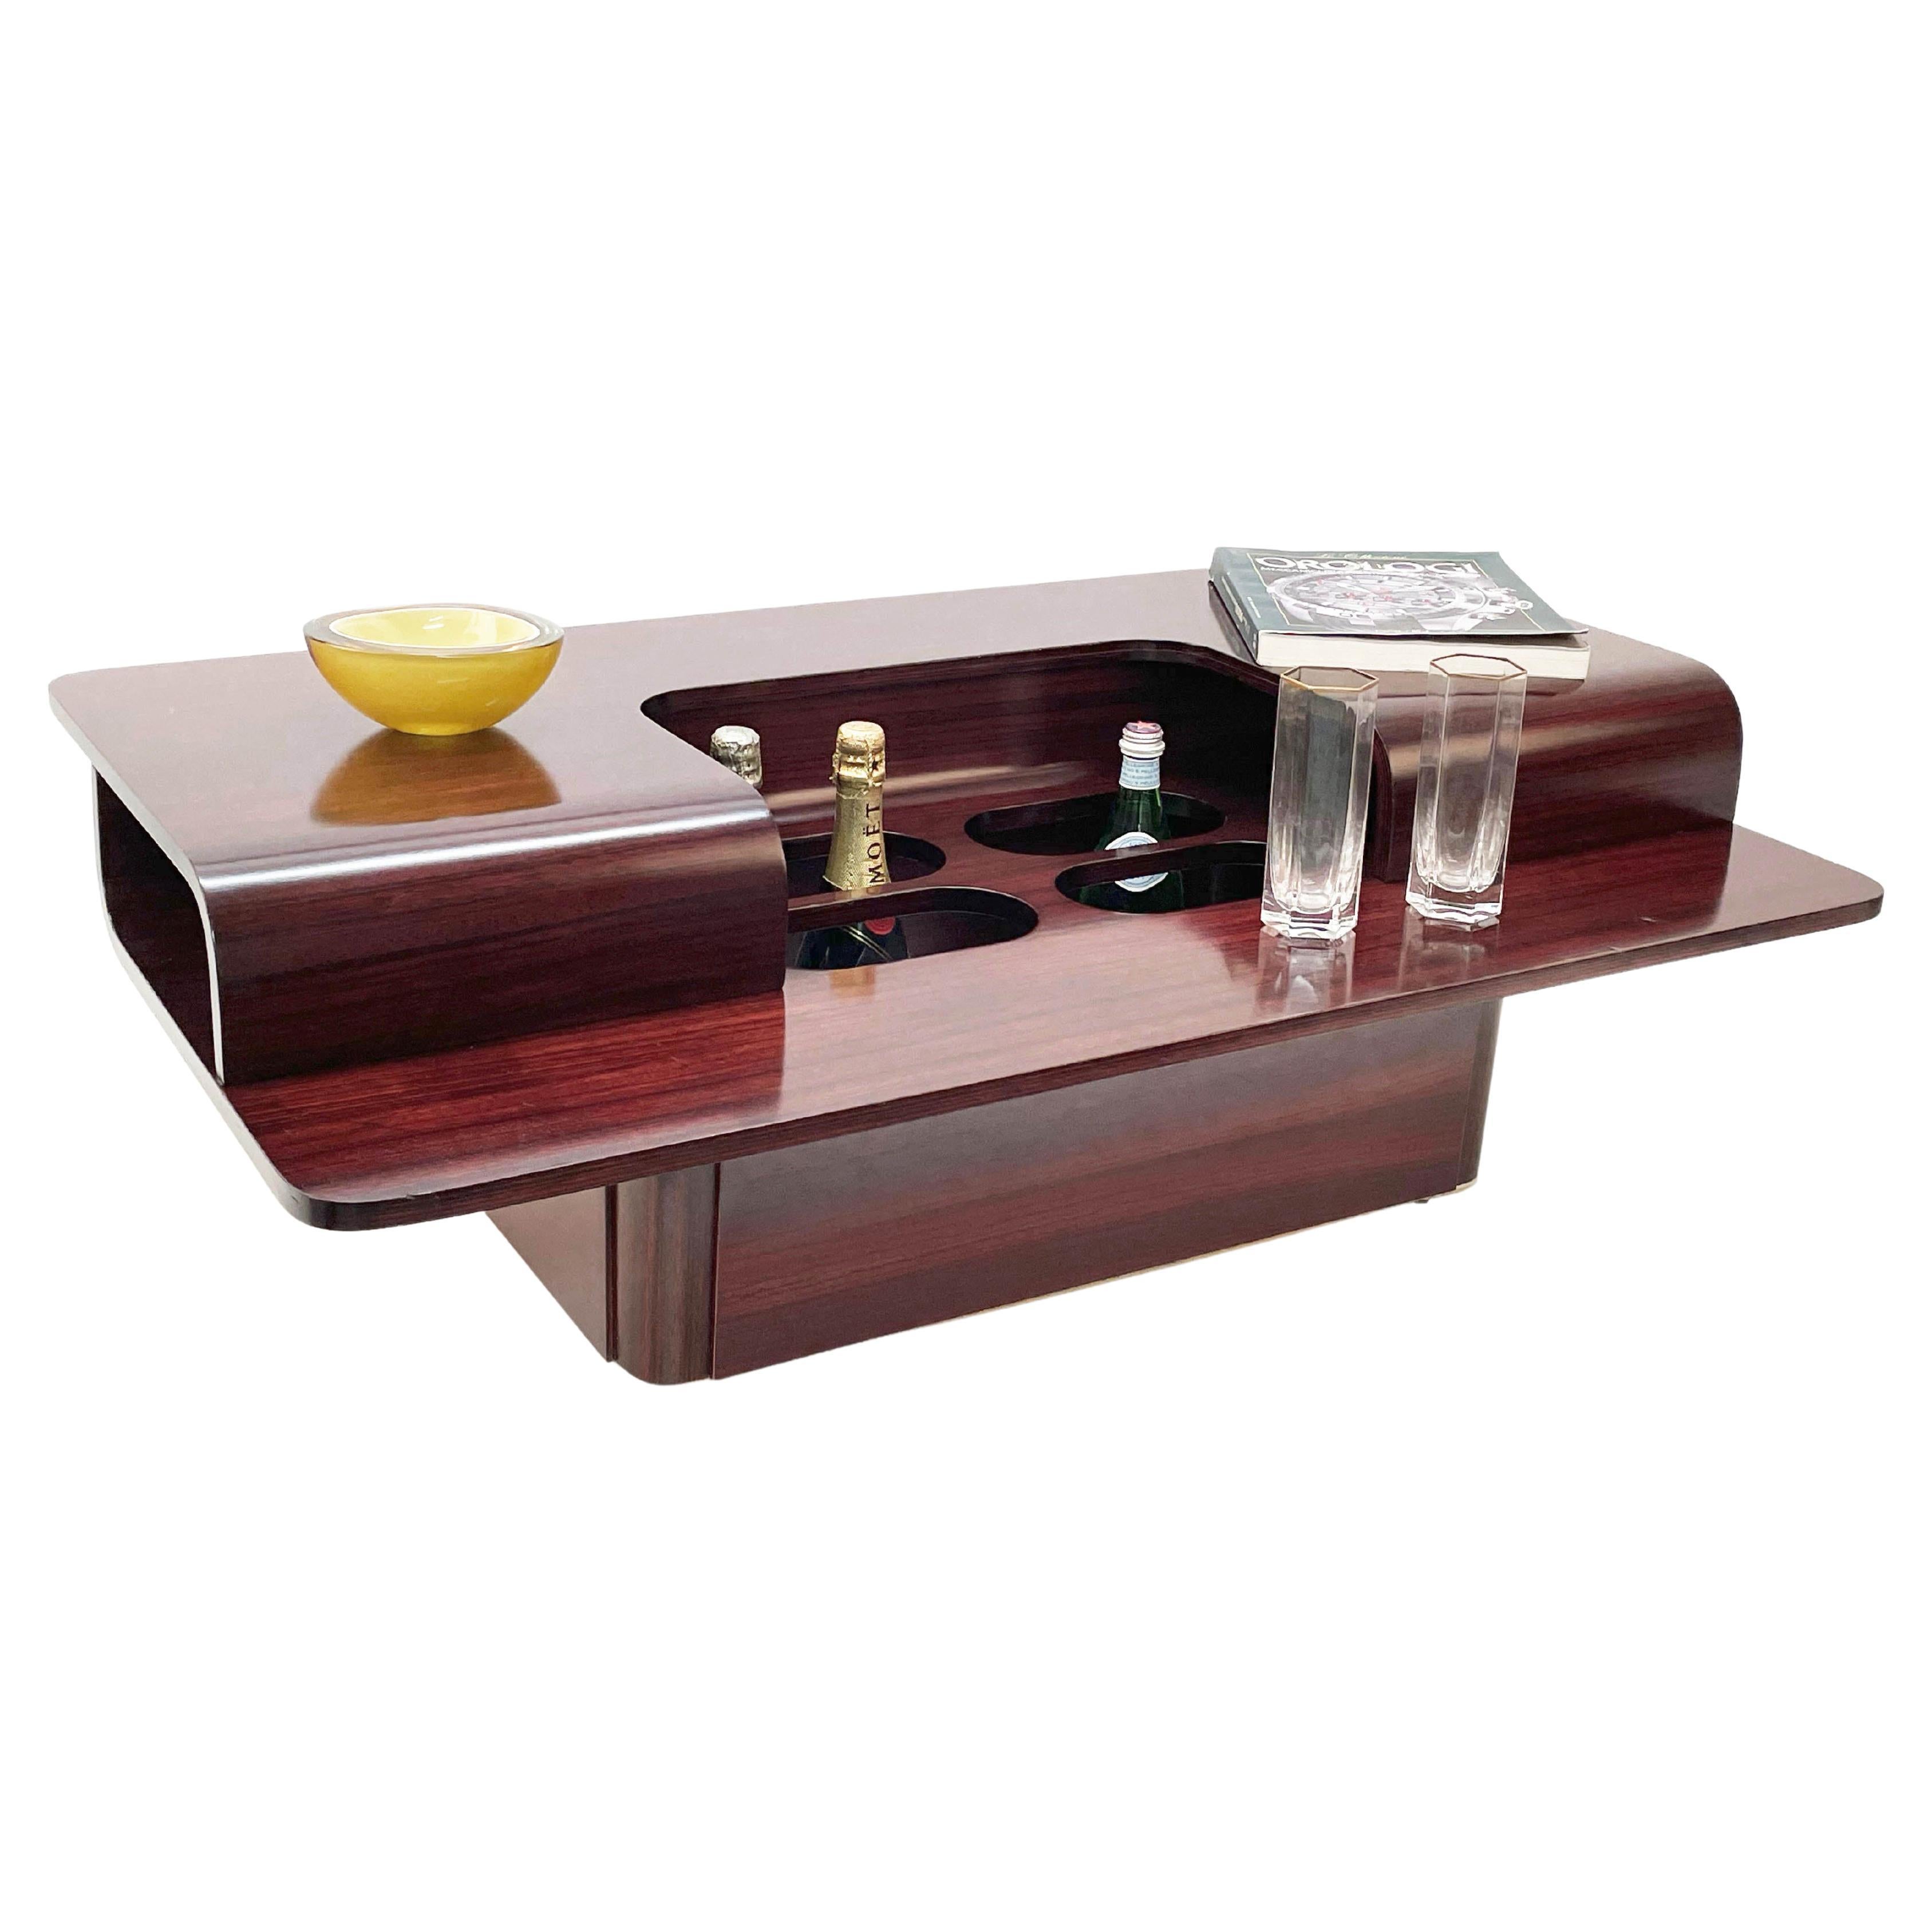 Midcentury Italian Dark Brown Wooden Coffee Table with Bottle Holders, 1970s For Sale 11